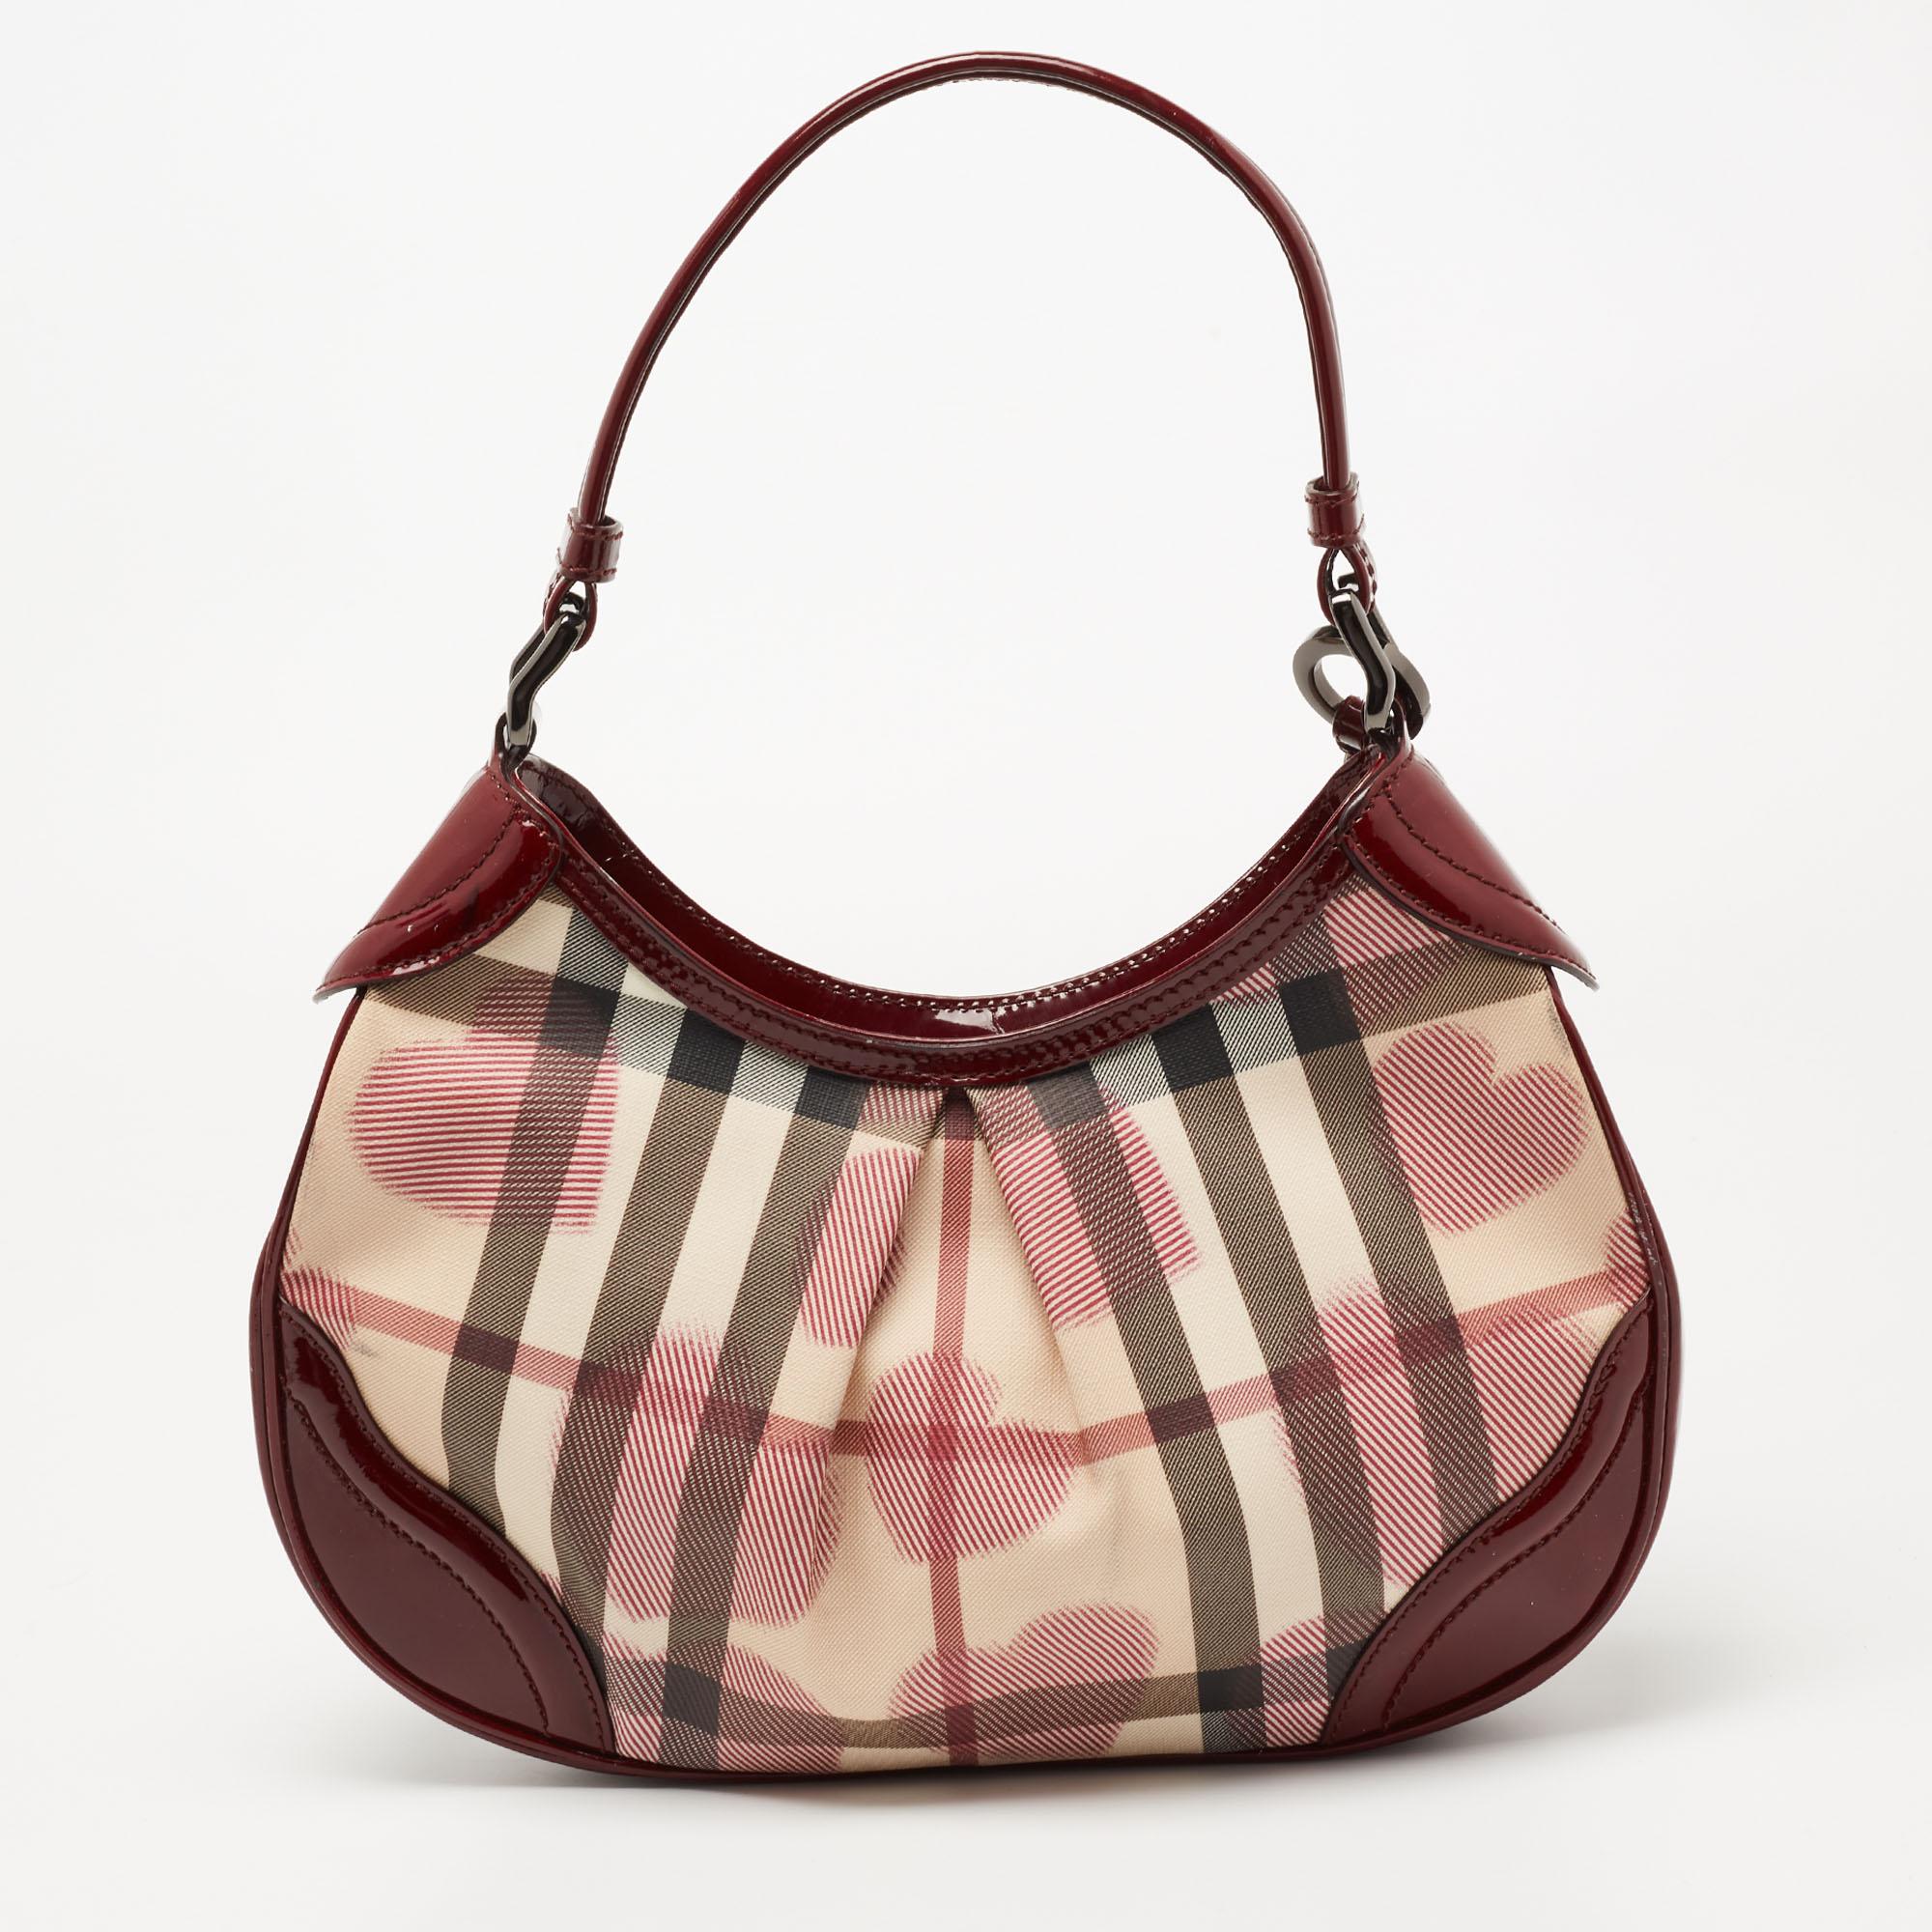 The Brooklyn hobo by Burberry is an everyday-friendly handbag. It is crafted from House Check Heart PVC and patent leather. This hobo features a top zip closure, a canvas-lined interior, and a single handle.
